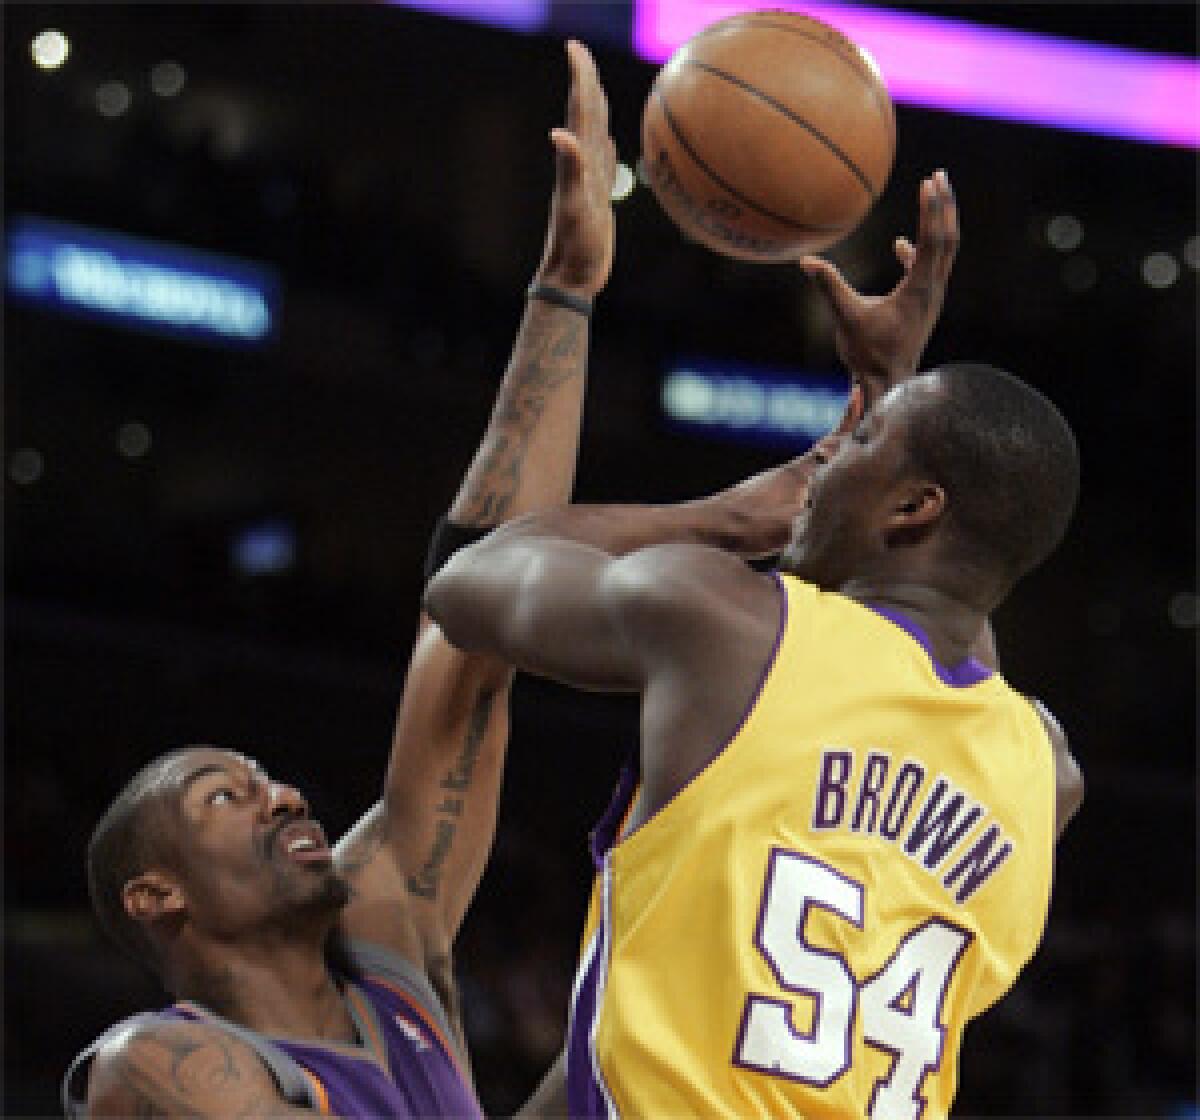 AFFECTED: Kwame Brown, whose shot is blocked by Phoenix's Amare Stoudemire, says he went "into a shell" after hearing boos from Lakers fans during his seven-turnover game against the Suns on Thursday.